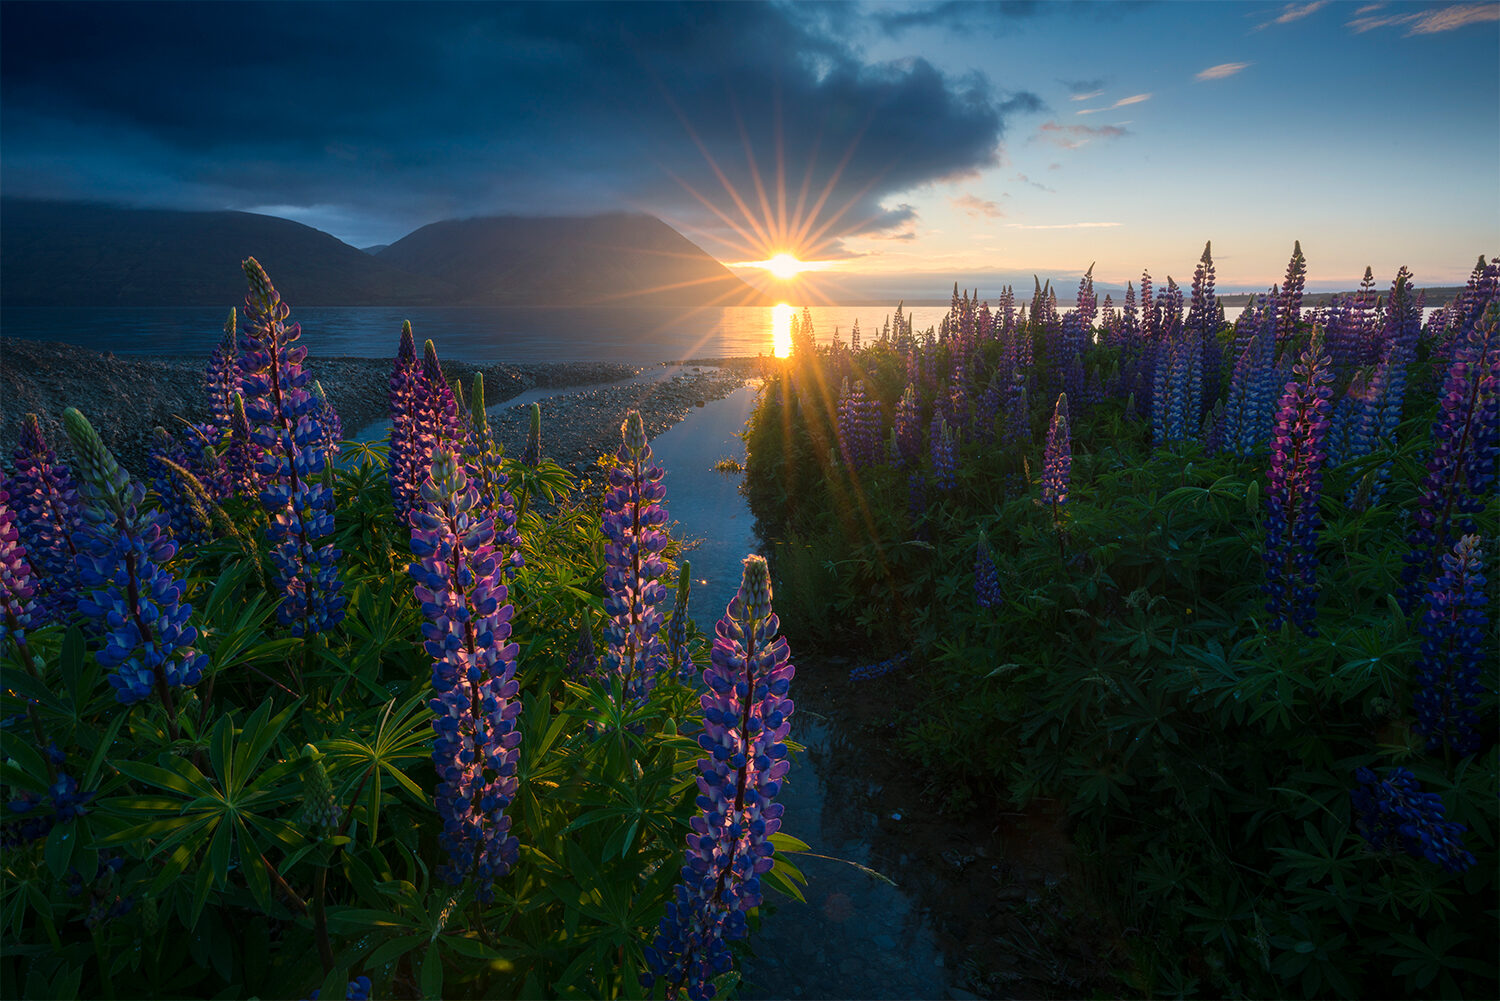 Lupin flowers by the lake, New Zealand